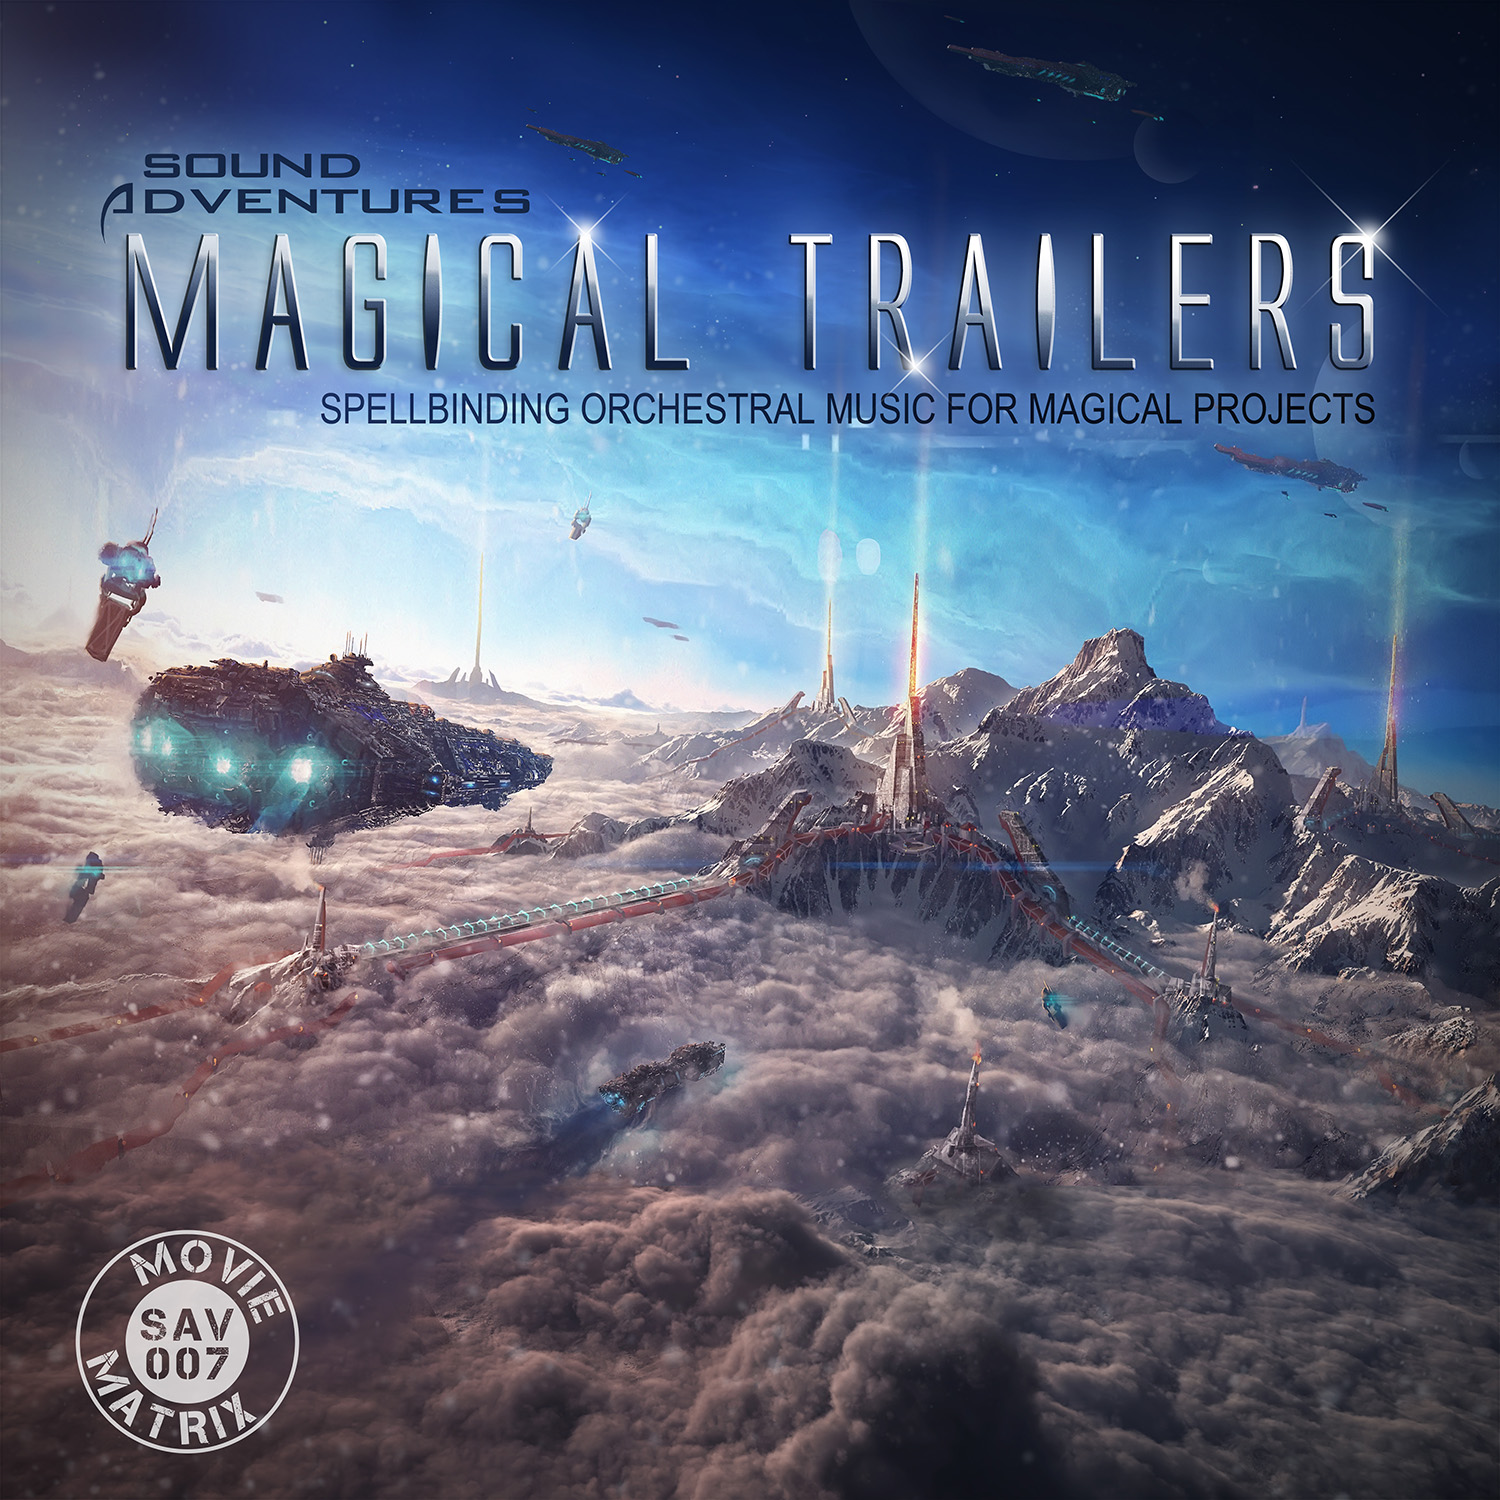 Sound Adventures: Magical Trailers